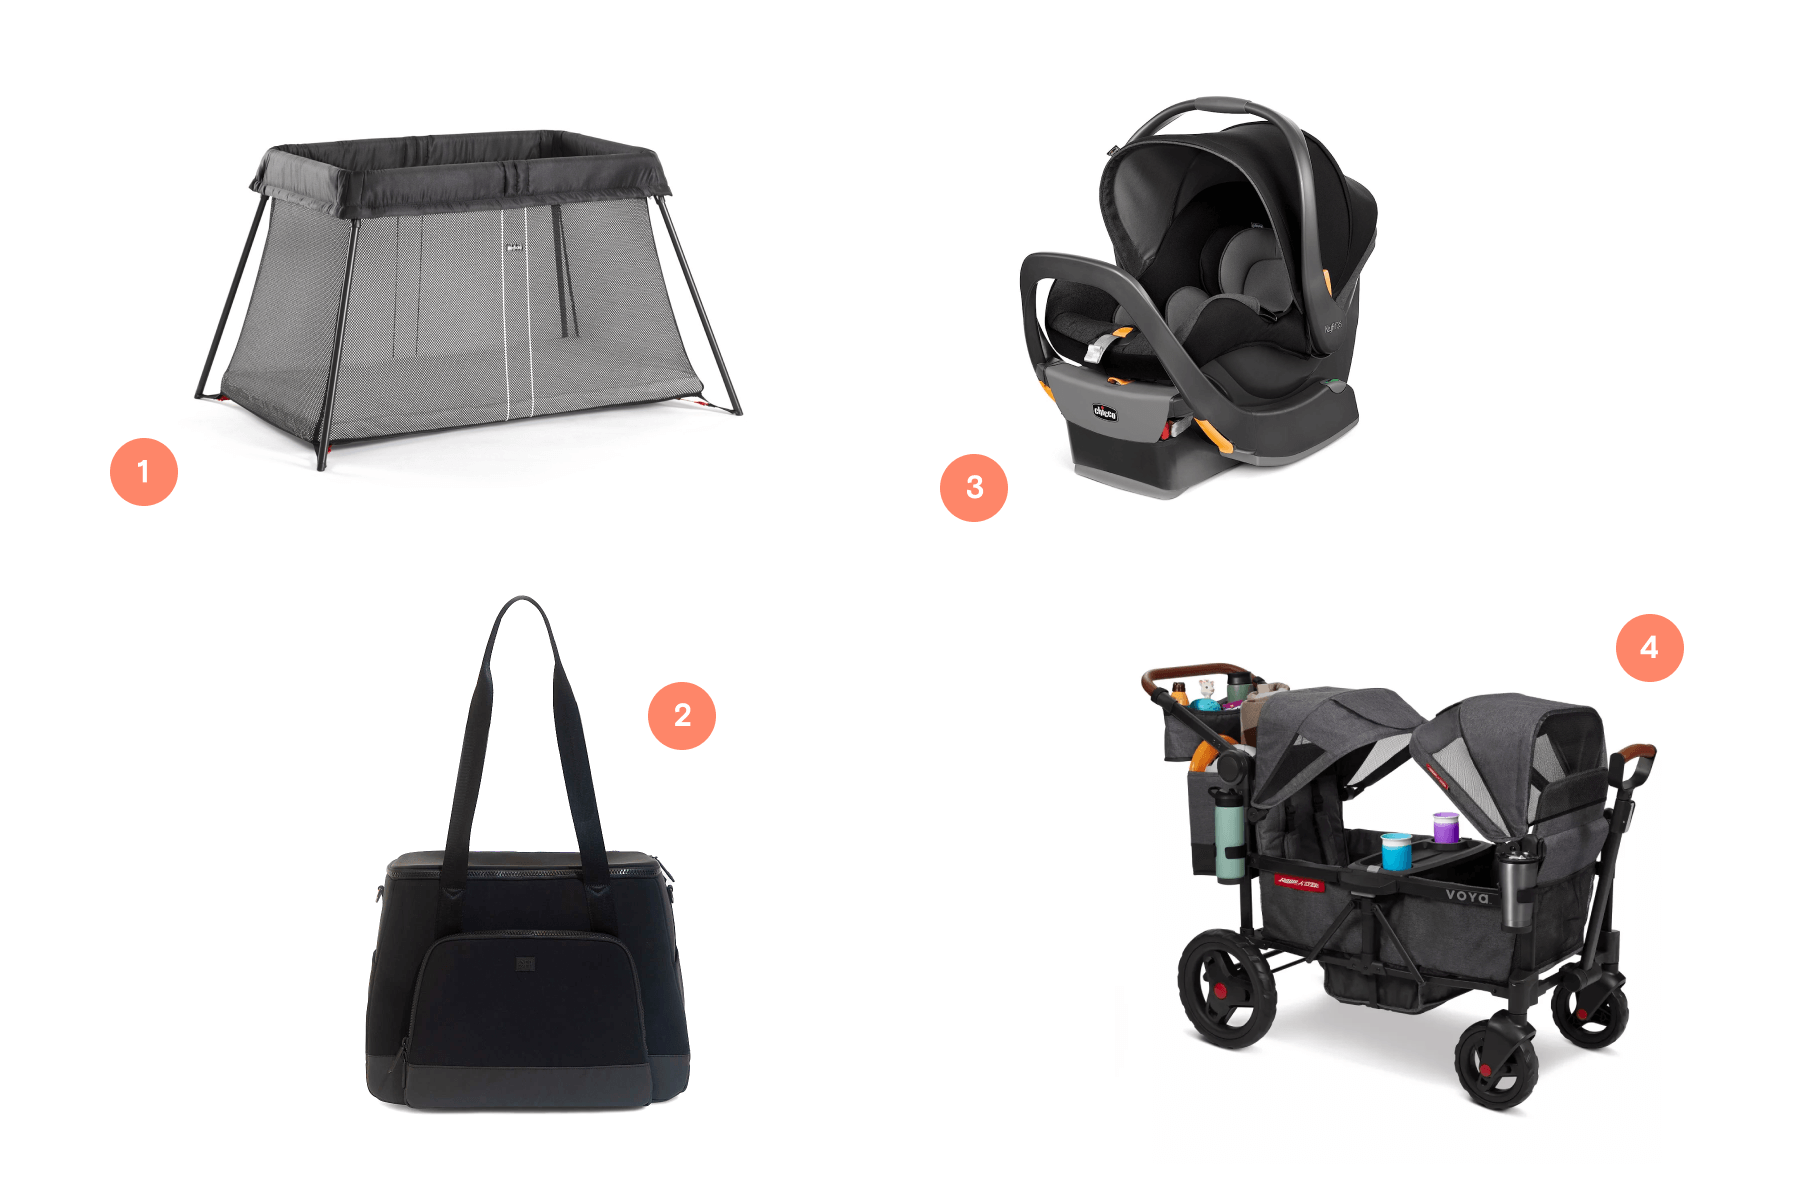 Four numbered baby items: A travel crib, a black diaper bag, a car seat, and a wagon-style stroller.